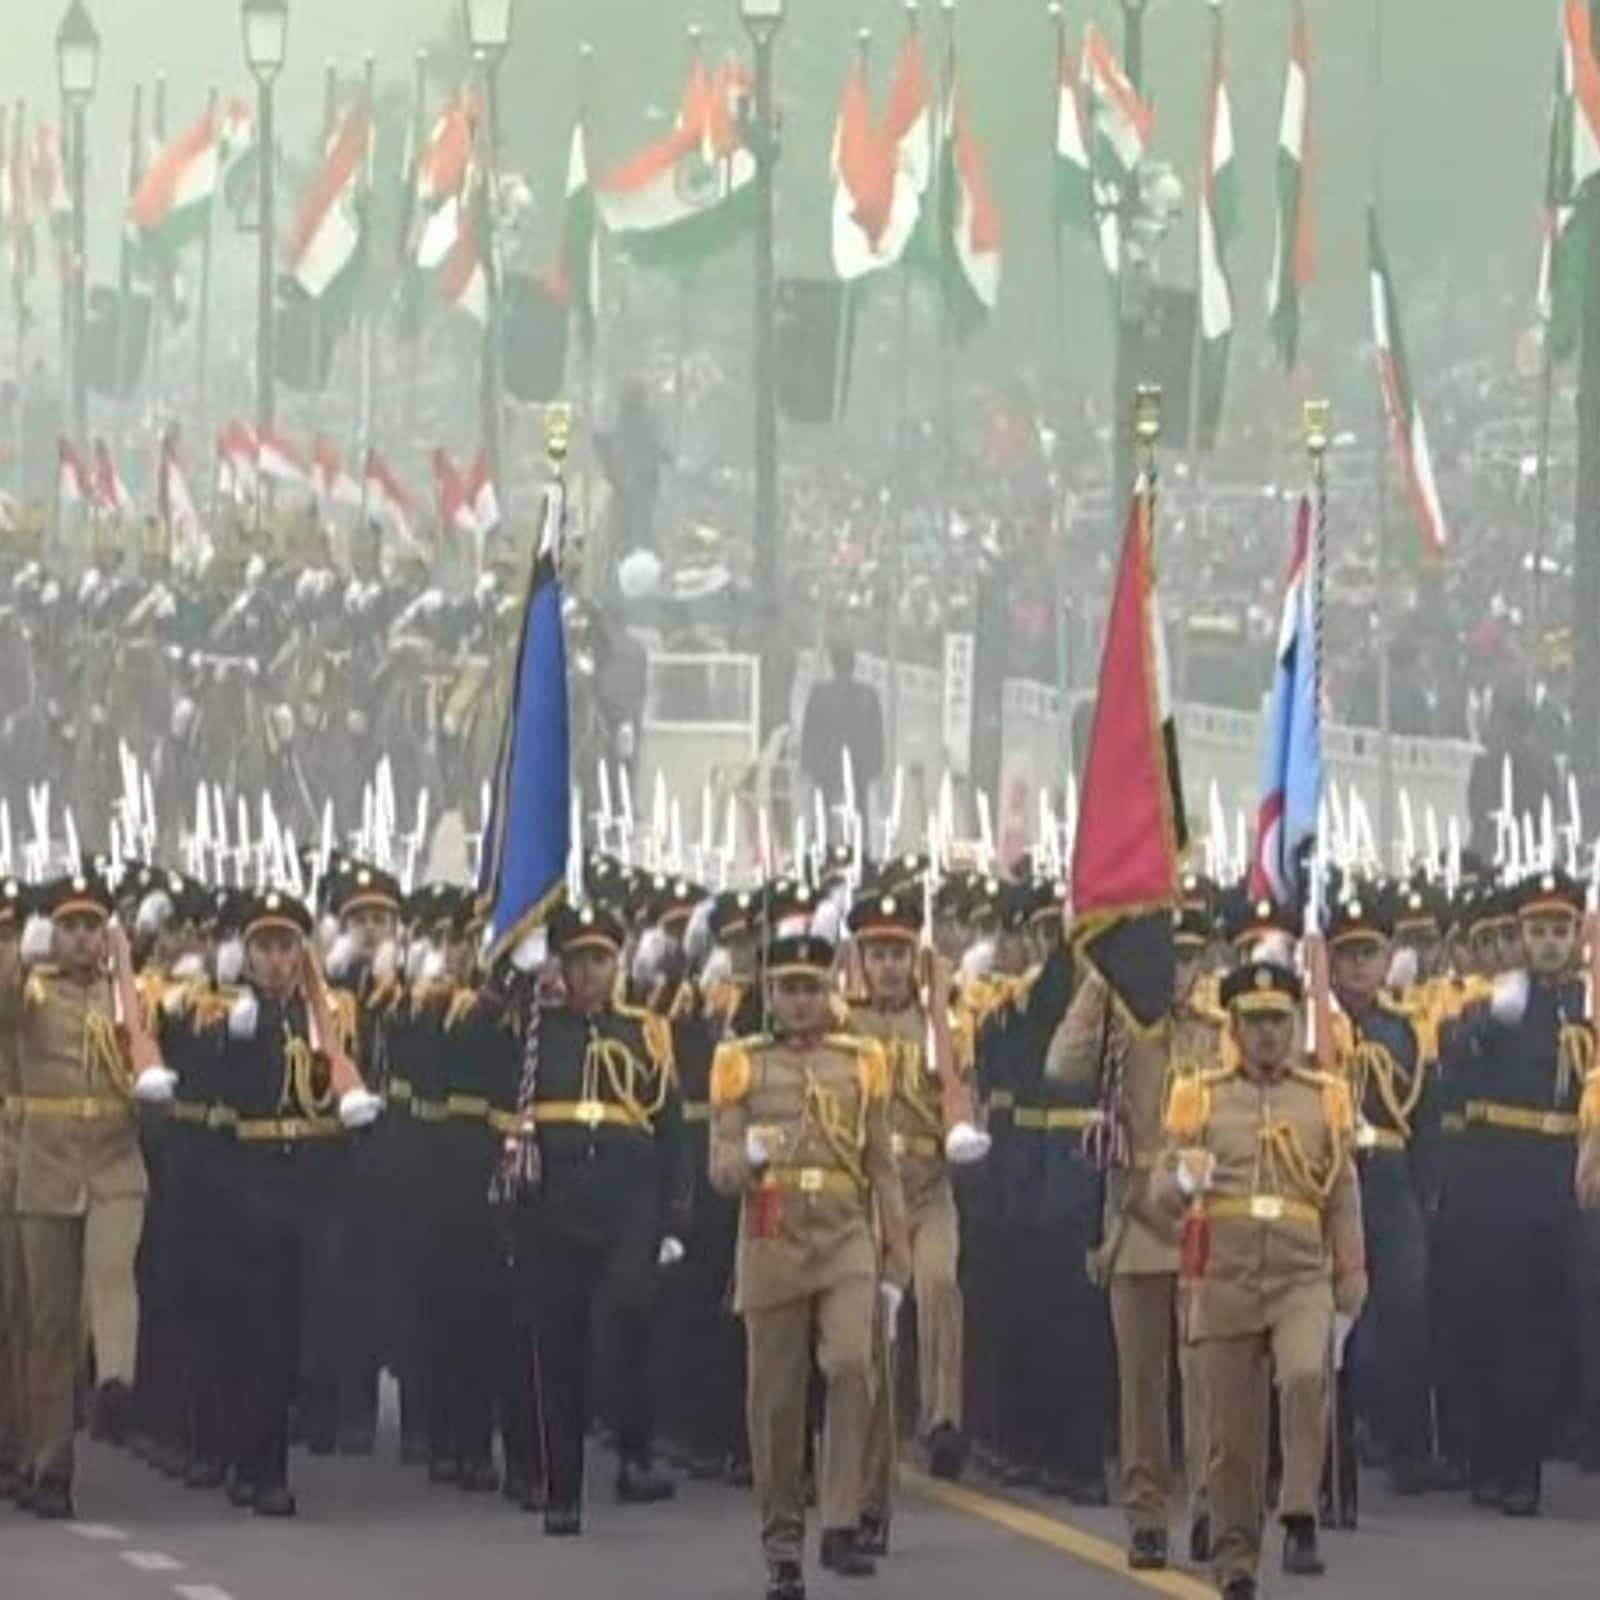 R-Day parade: Indian Army marching contingents to display